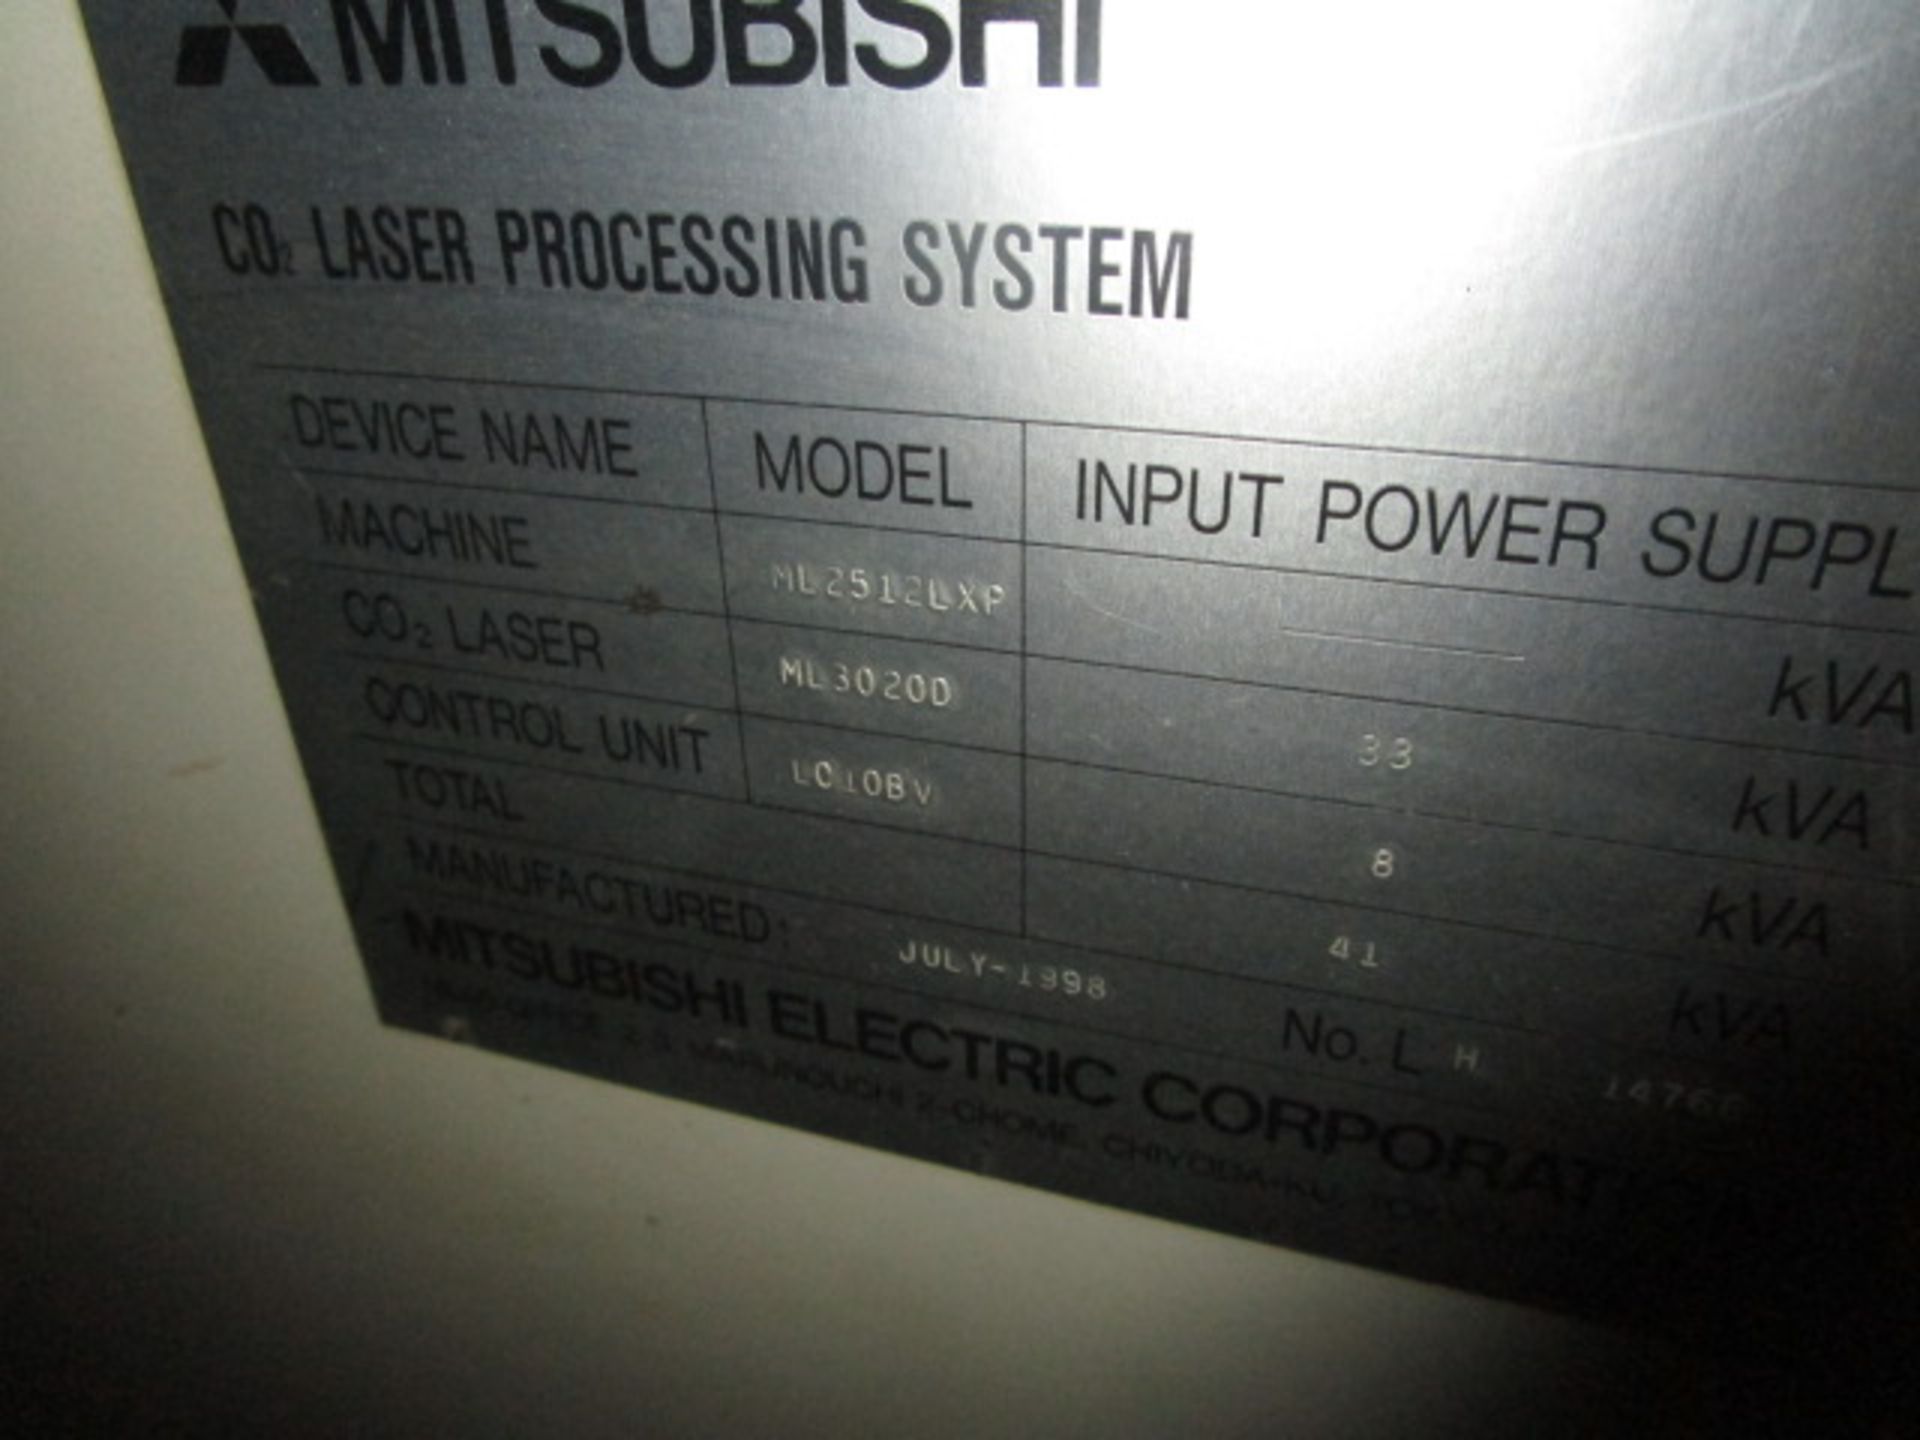 Mitsubishi CO2 Laser Processing System, ML2512LXP 3020D Flying Optic CNC Laser Cutting System, MFG - Image 19 of 32